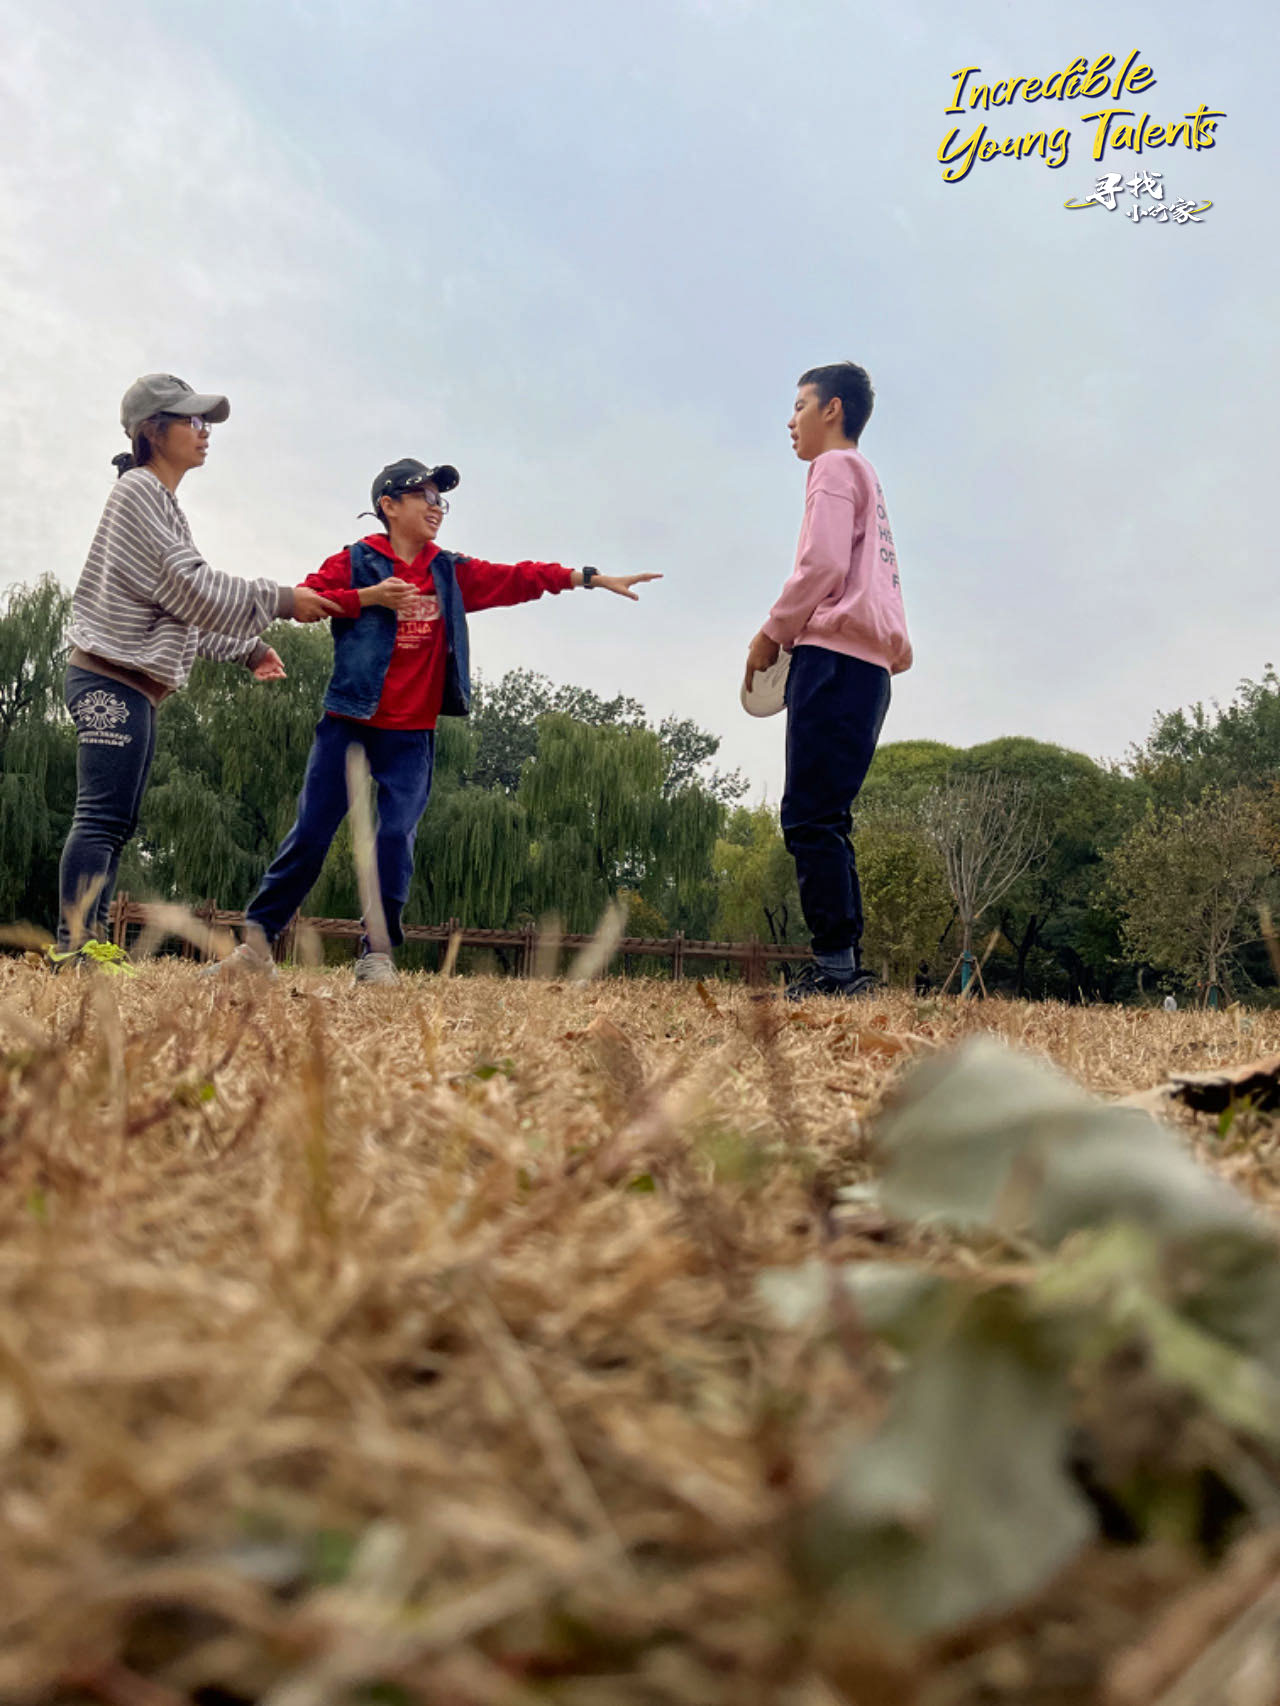 Zhu Jingxiu plays frisbee with his mother and older brother at a public park in Beijing. /CGTN